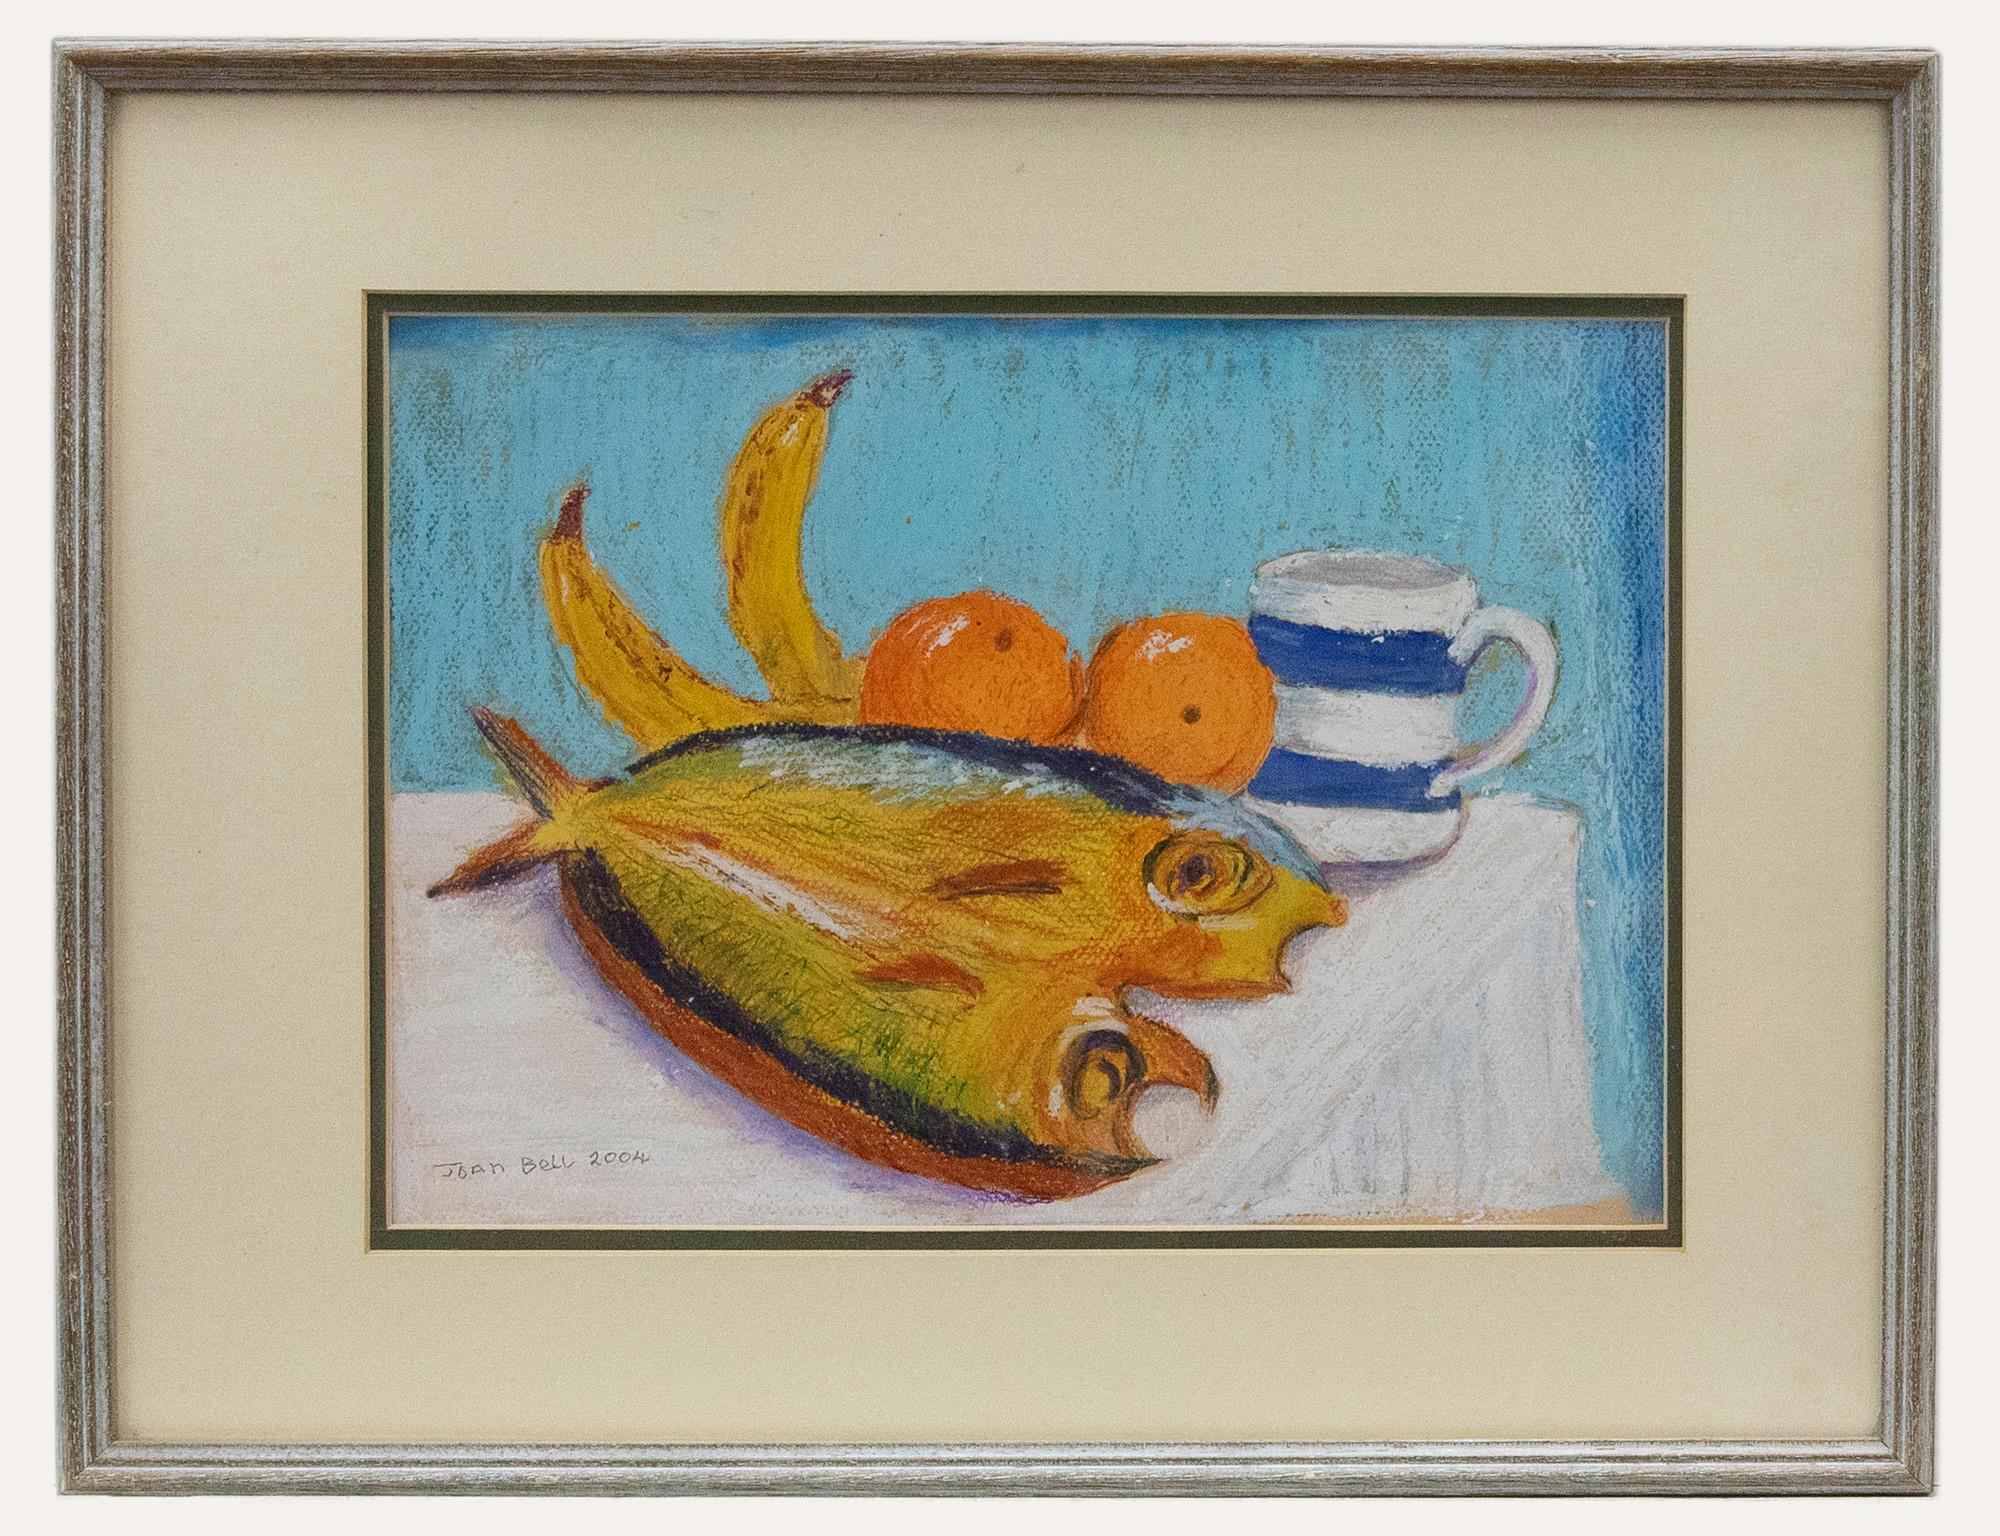 Unknown Still-Life - Joan Bell - 2004 Pastel, Striped Mug and Fish